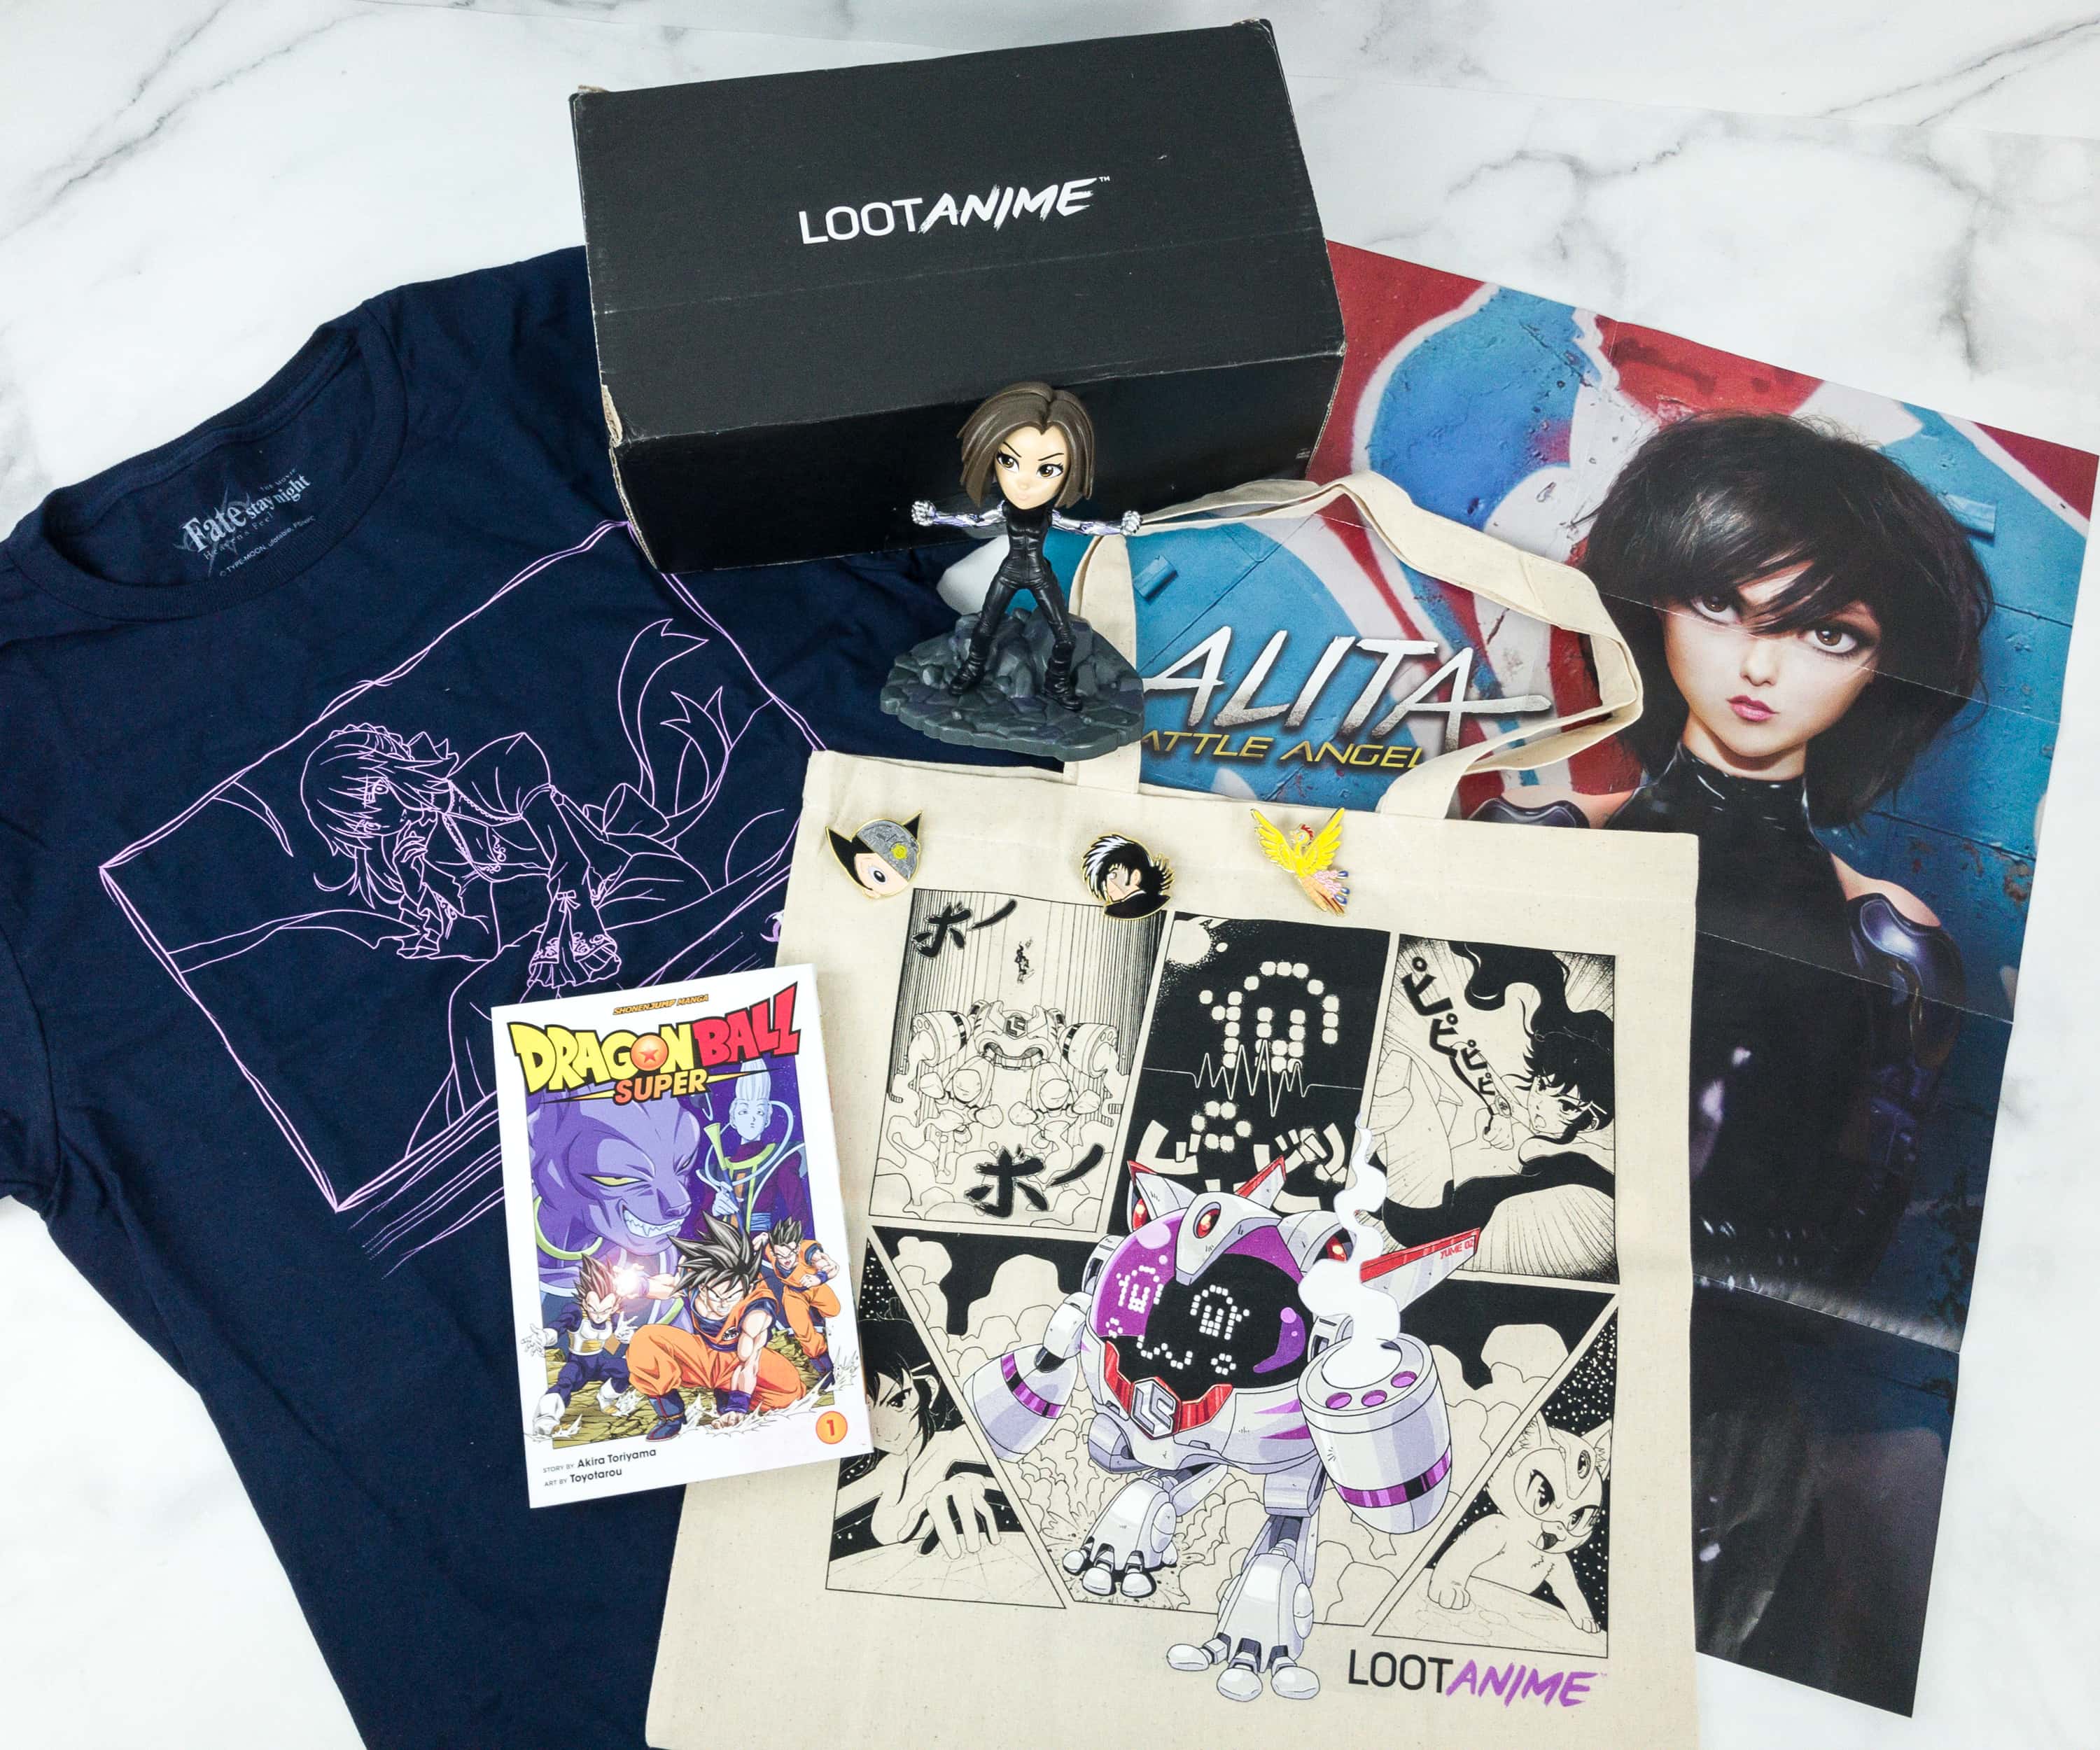 ANIME: Let's Talk Loot Anime's Undead October Crate!!!